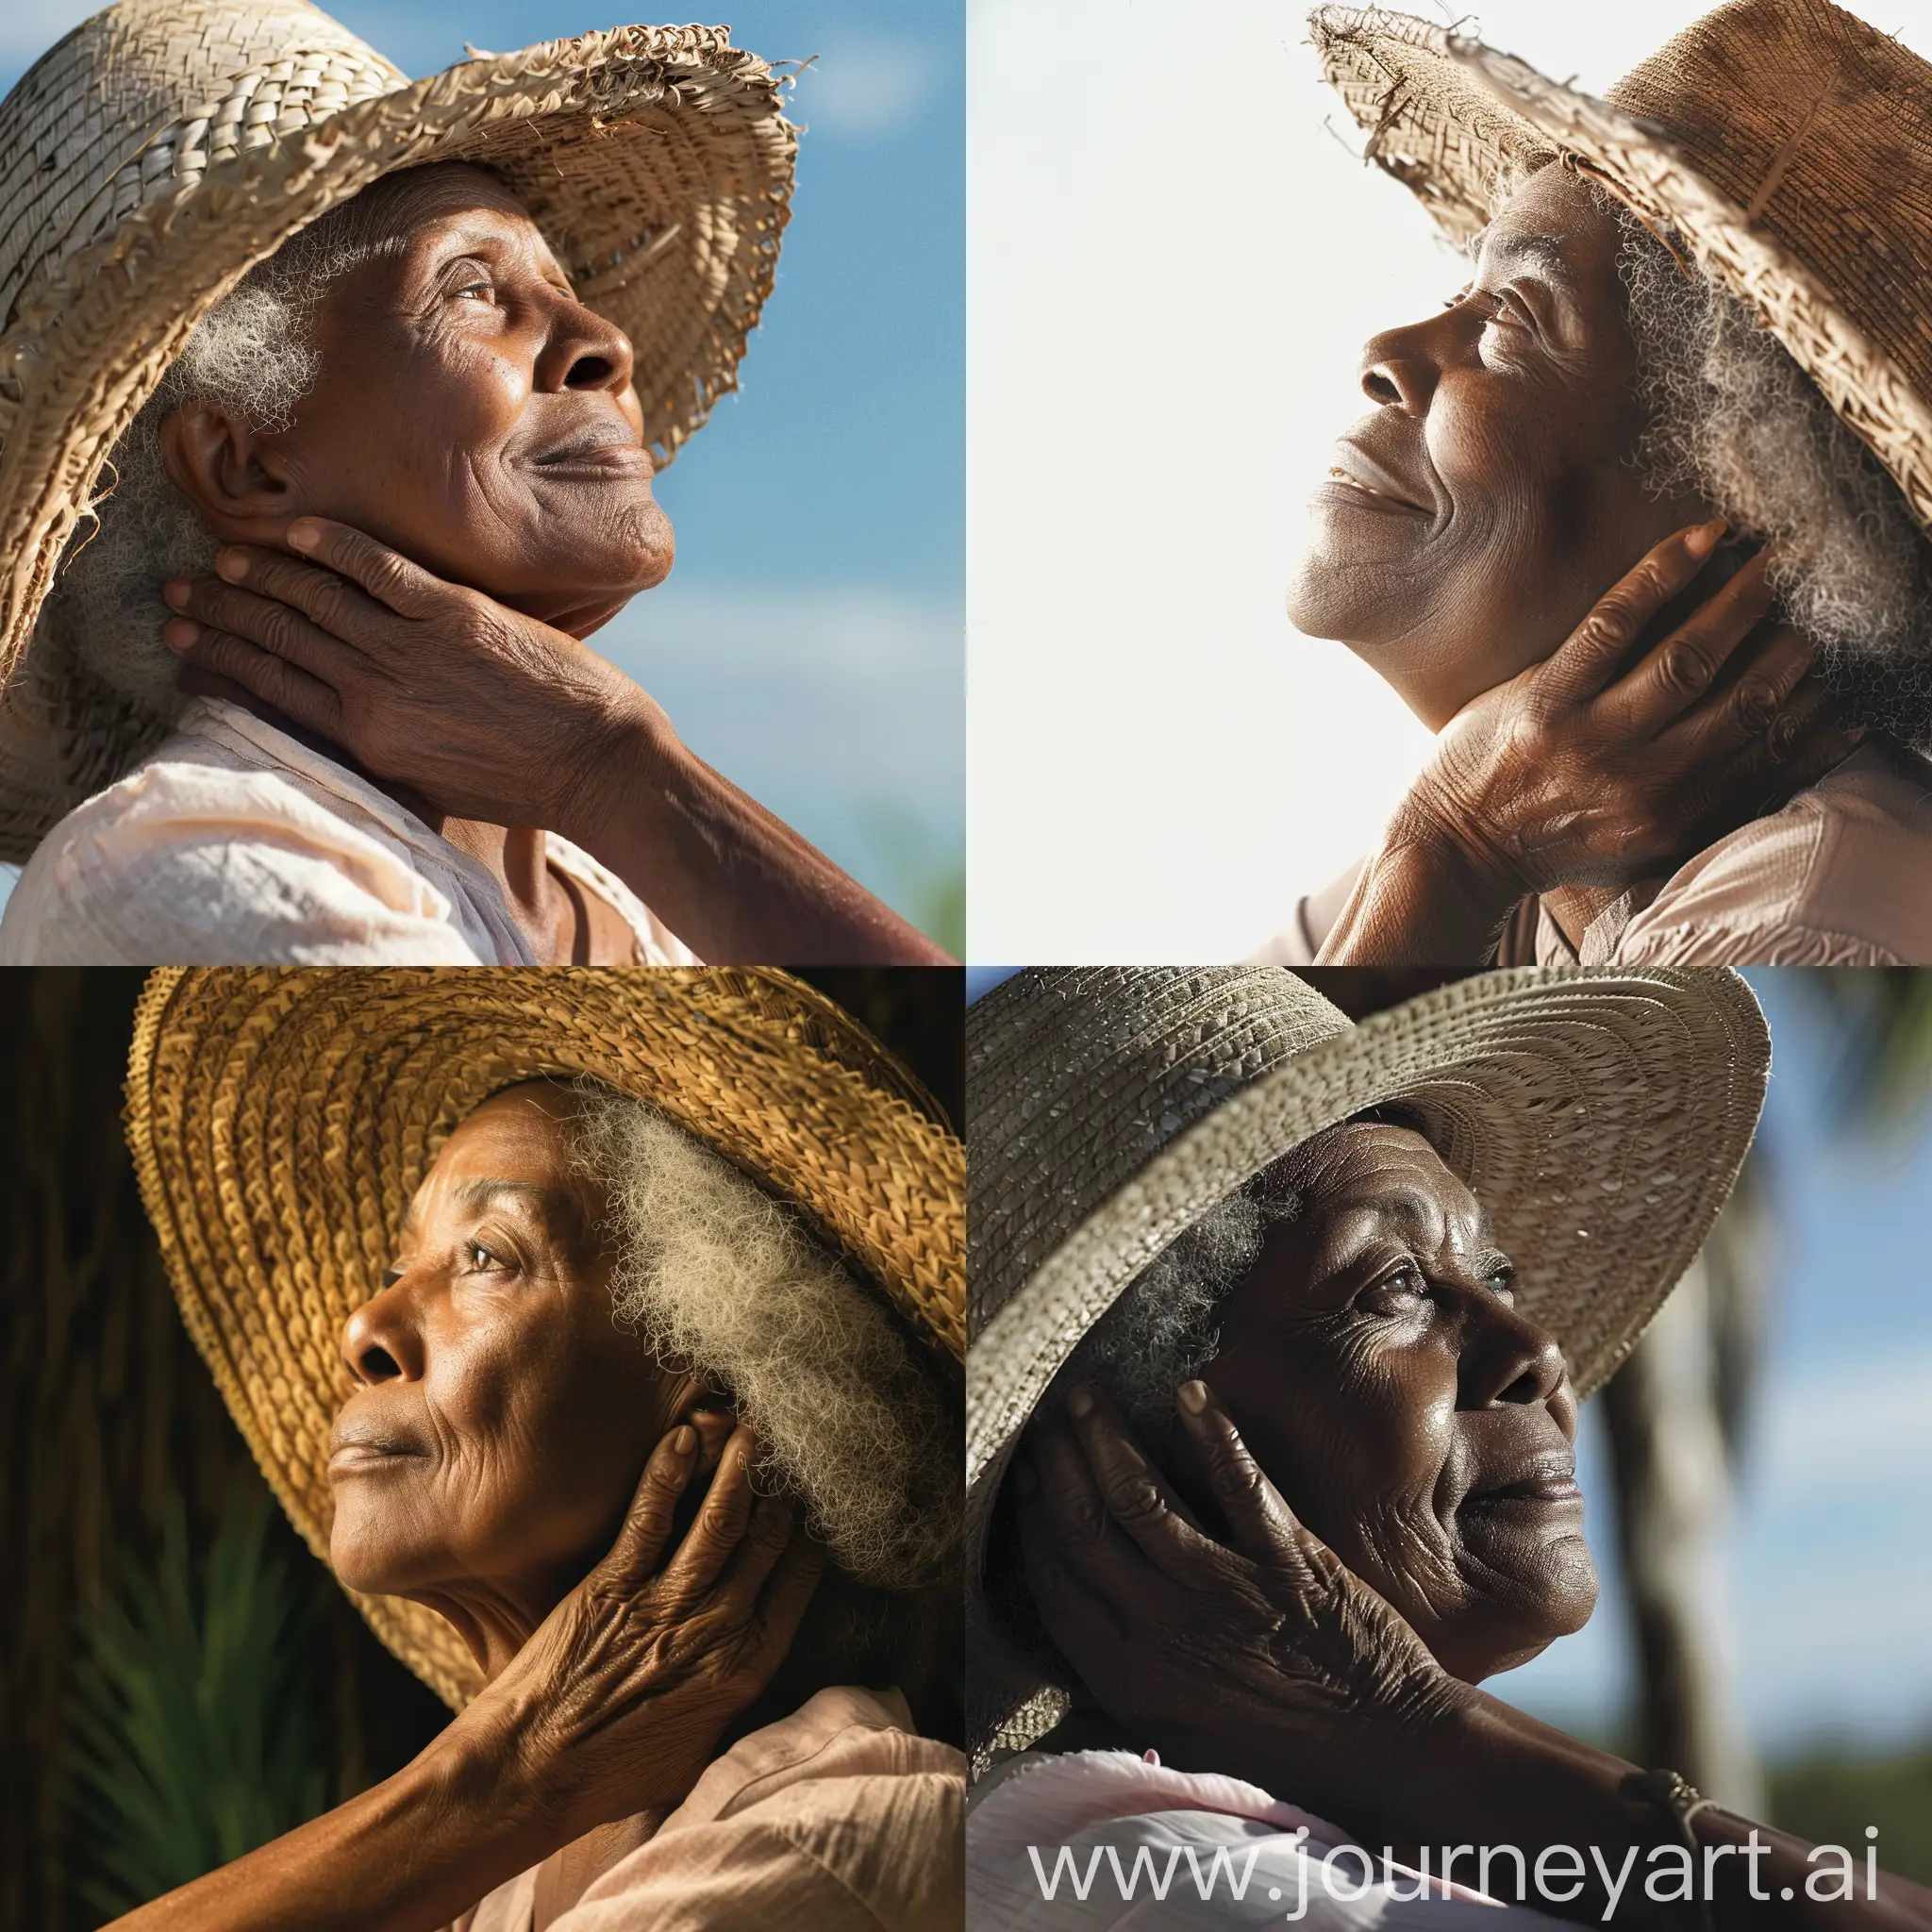 Generate an image of a 68-year-old African woman in a side profile portrait, gracefully holding her neck with a reflective expression. She is wearing an old straw hat. On a sunny day